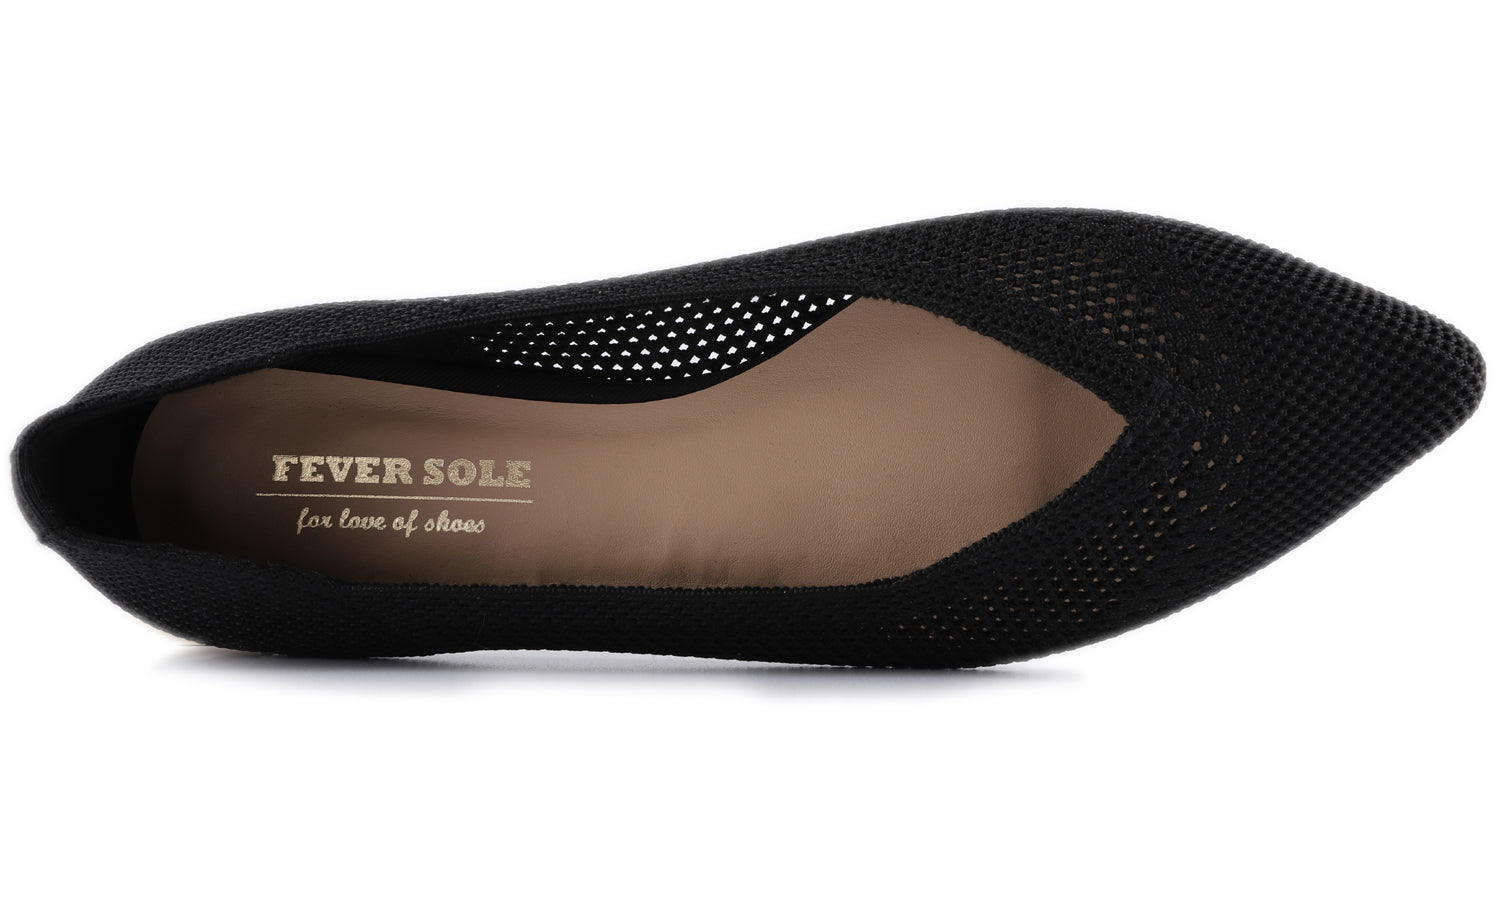 Feversole Women's Woven Fashion Breathable Knit Flat Shoes Pointed Black